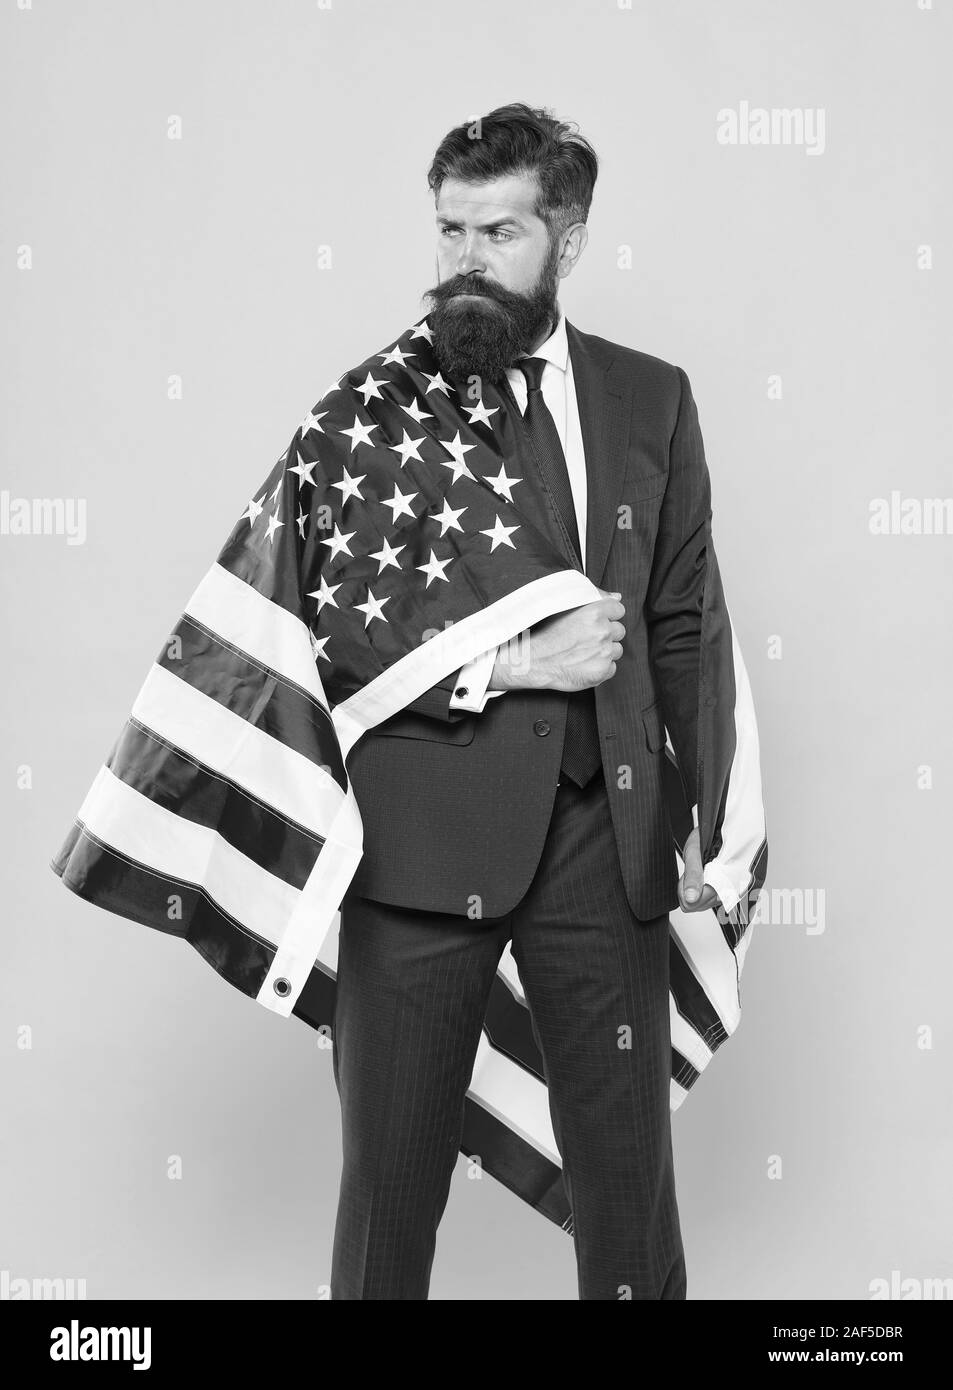 Independence means decide according to law and facts. Businessman bearded man in formal suit hold flag USA. Businessman concept. Successful businessman lawyer or politician. Business people. Stock Photo